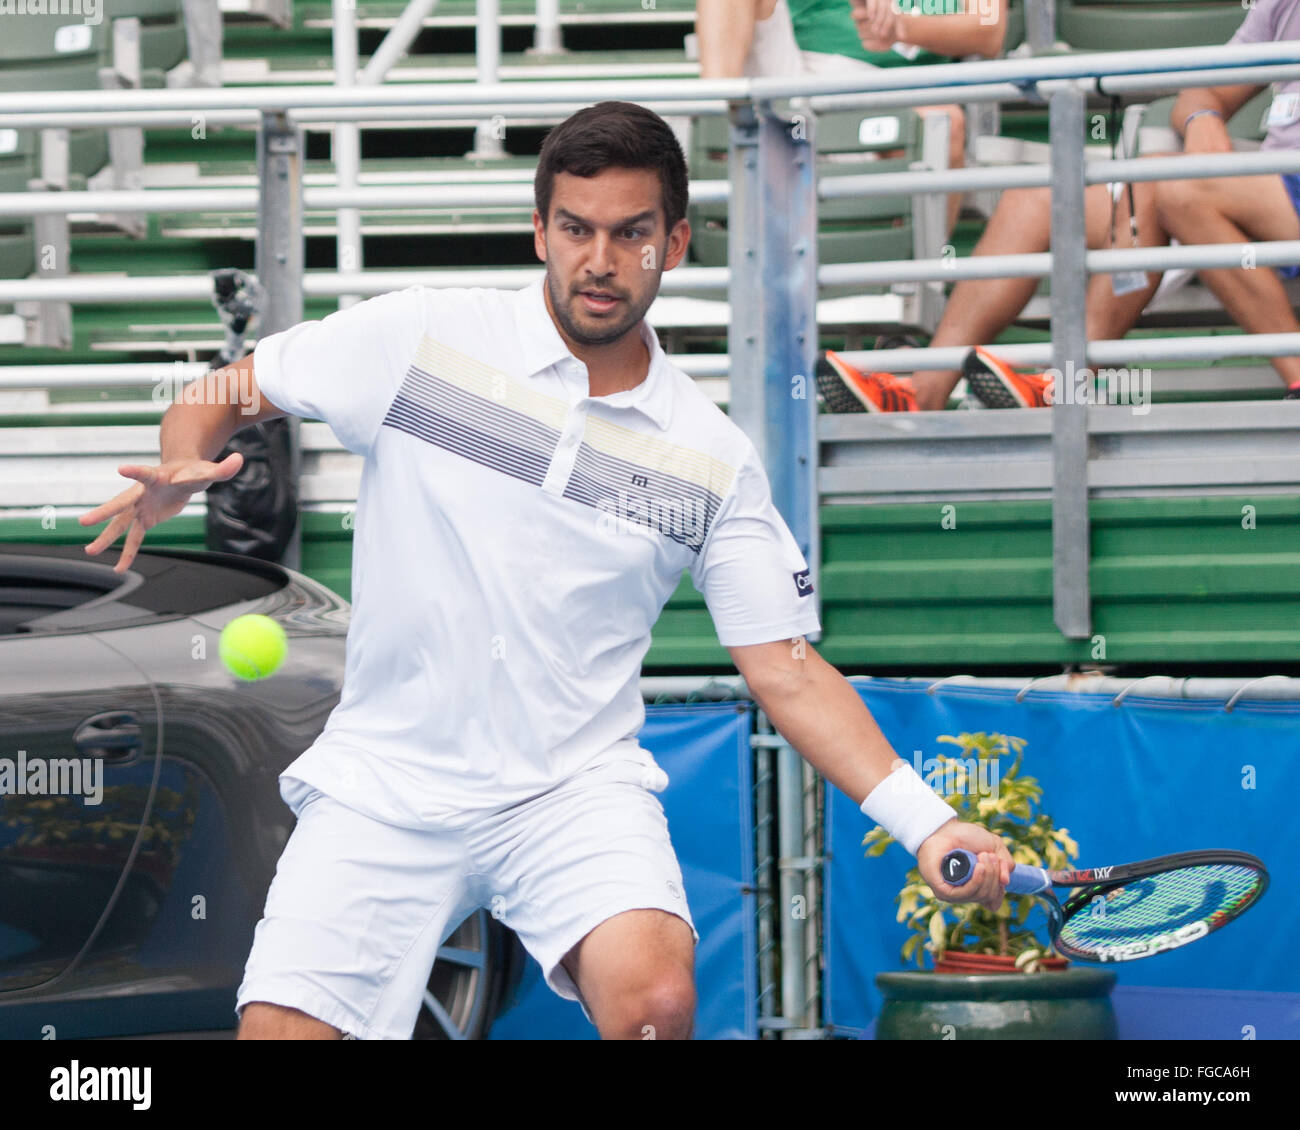 Delray Beach, Florida, US. 18th Feb, 2016. TREAT HUEY Filipino-American pro tennis player. The Filipino-Belarusian third seed duo TREAT HUEY and MAX MIRNYI are through to the ATP World Tour Delray Beach Open semi-finals after a 6-3, 6-4 triumph over Australians Chris Guccione and Bernard Tomic. Credit:  Arnold Drapkin/ZUMA Wire/Alamy Live News Stock Photo